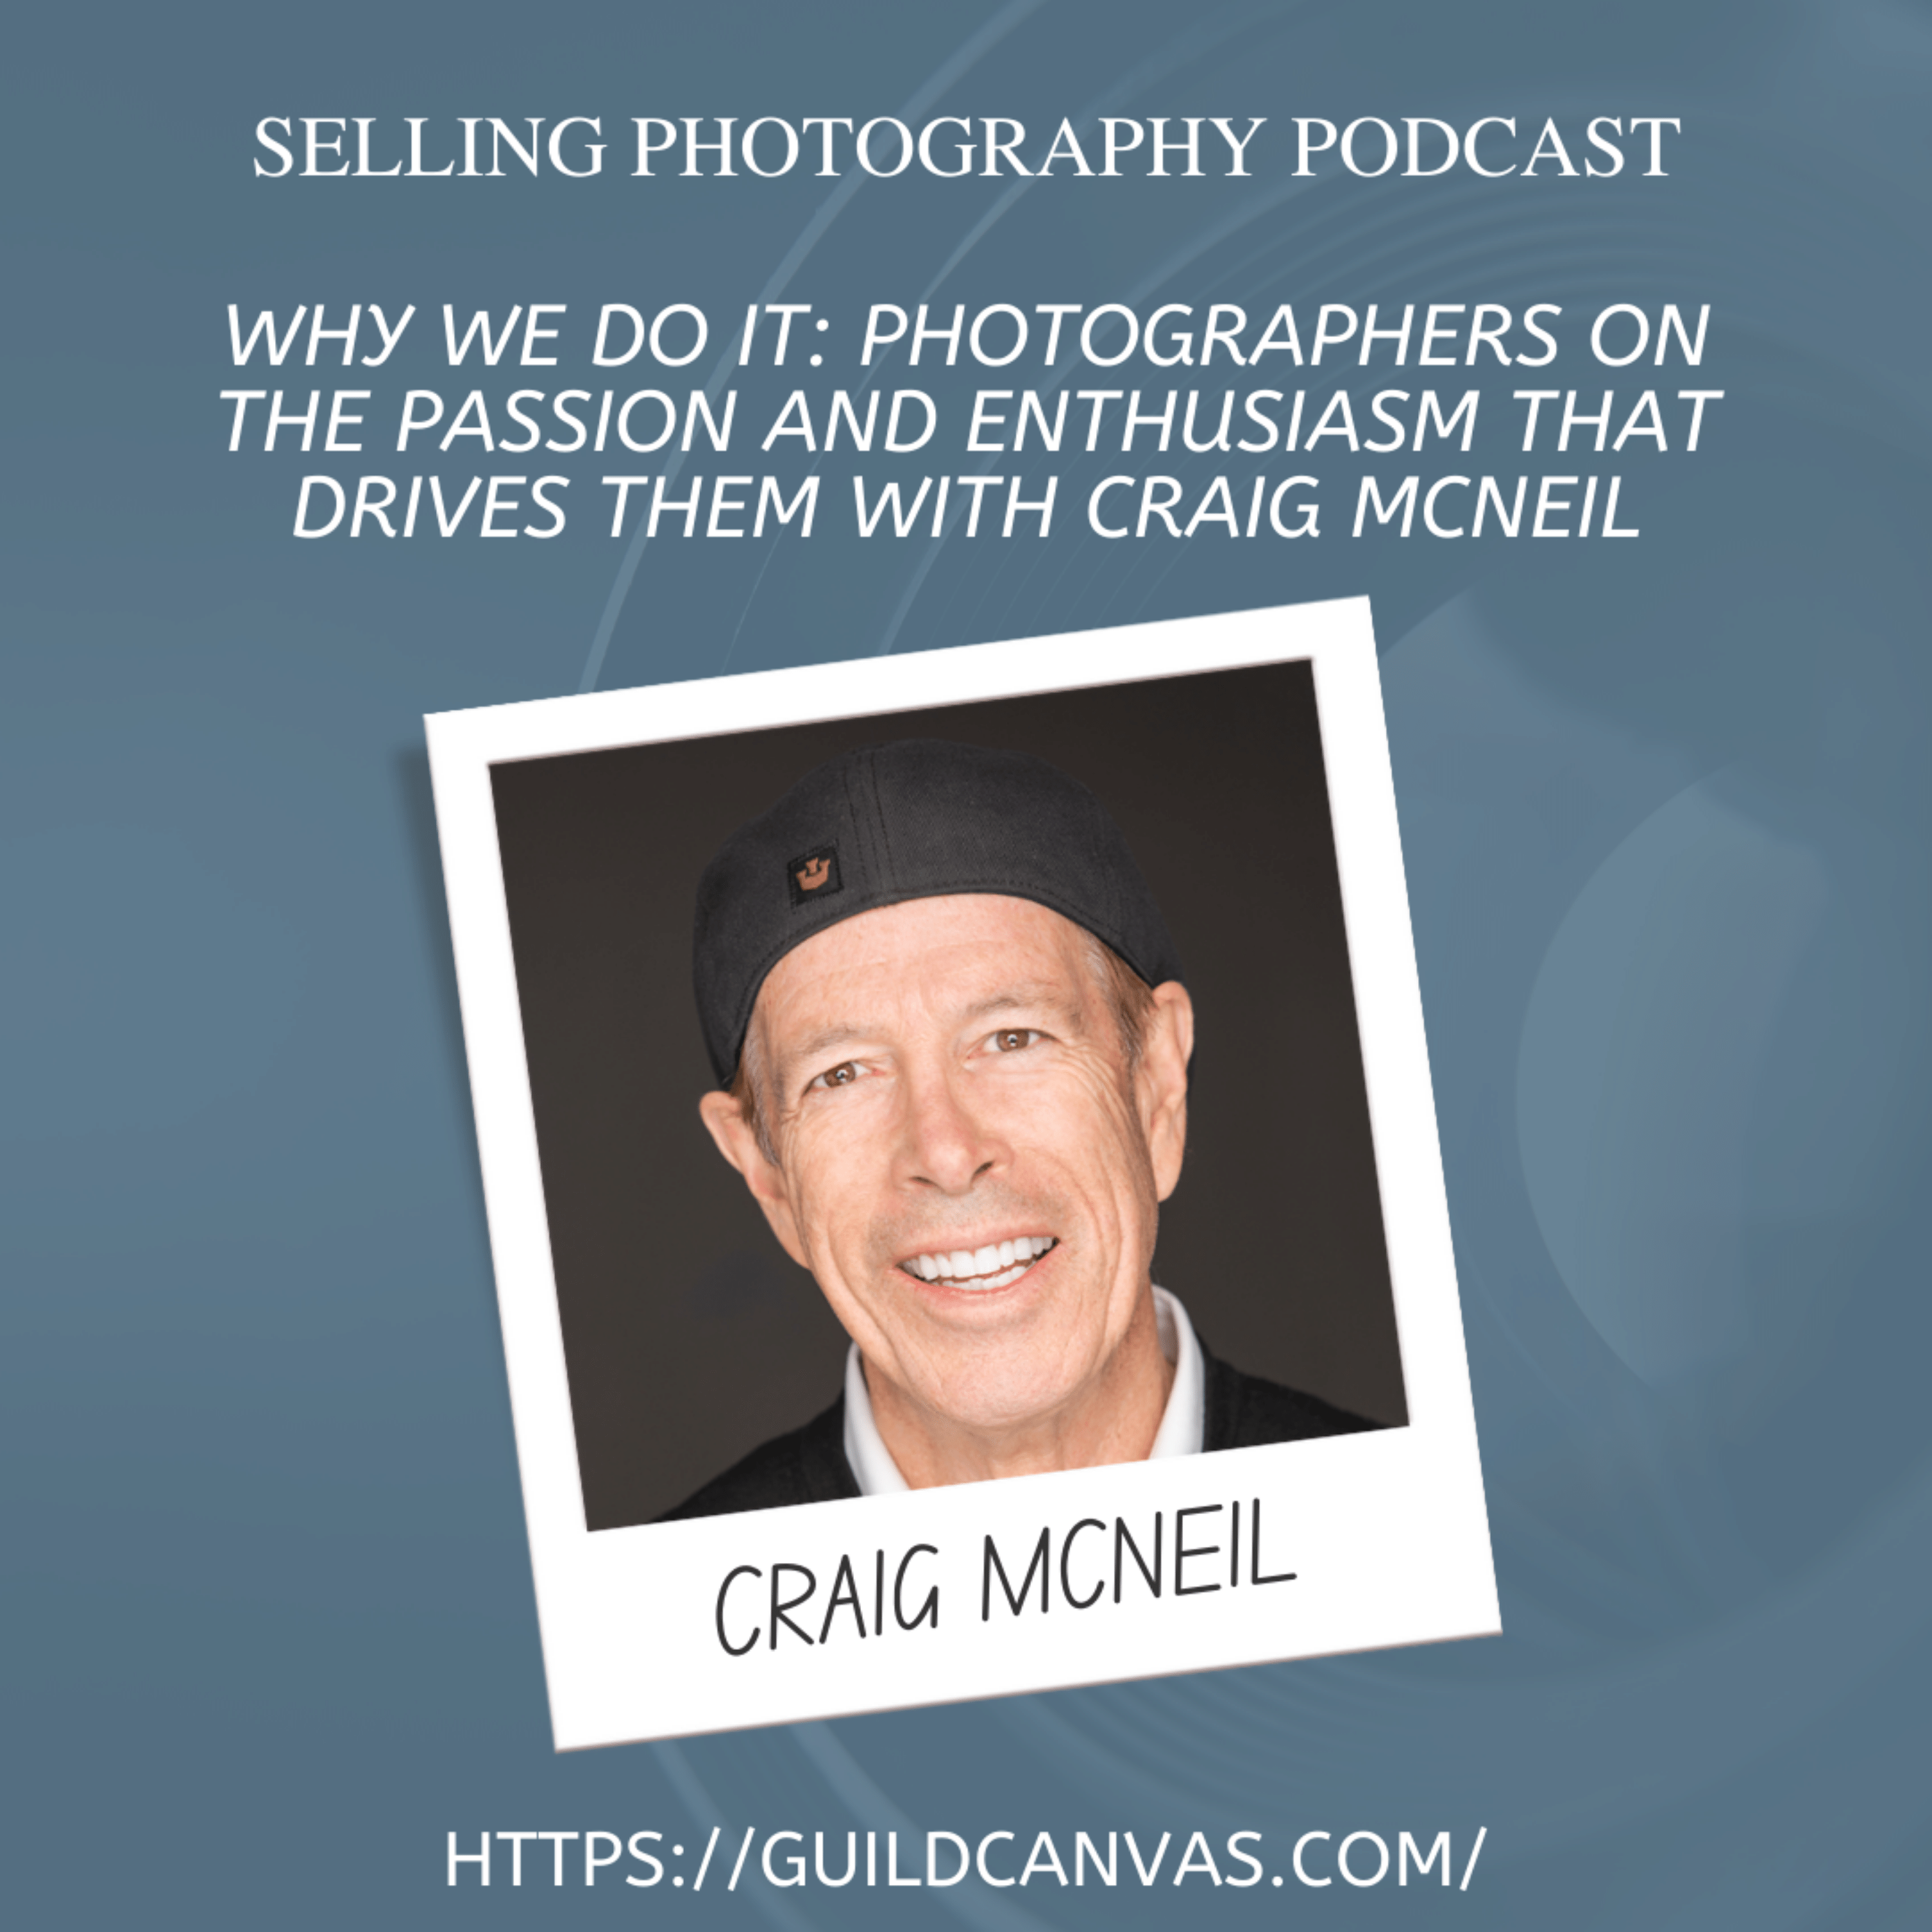 Why We Do It: Photographers on the Passion and Enthusiasm That Drives Them with Craig Mcneil